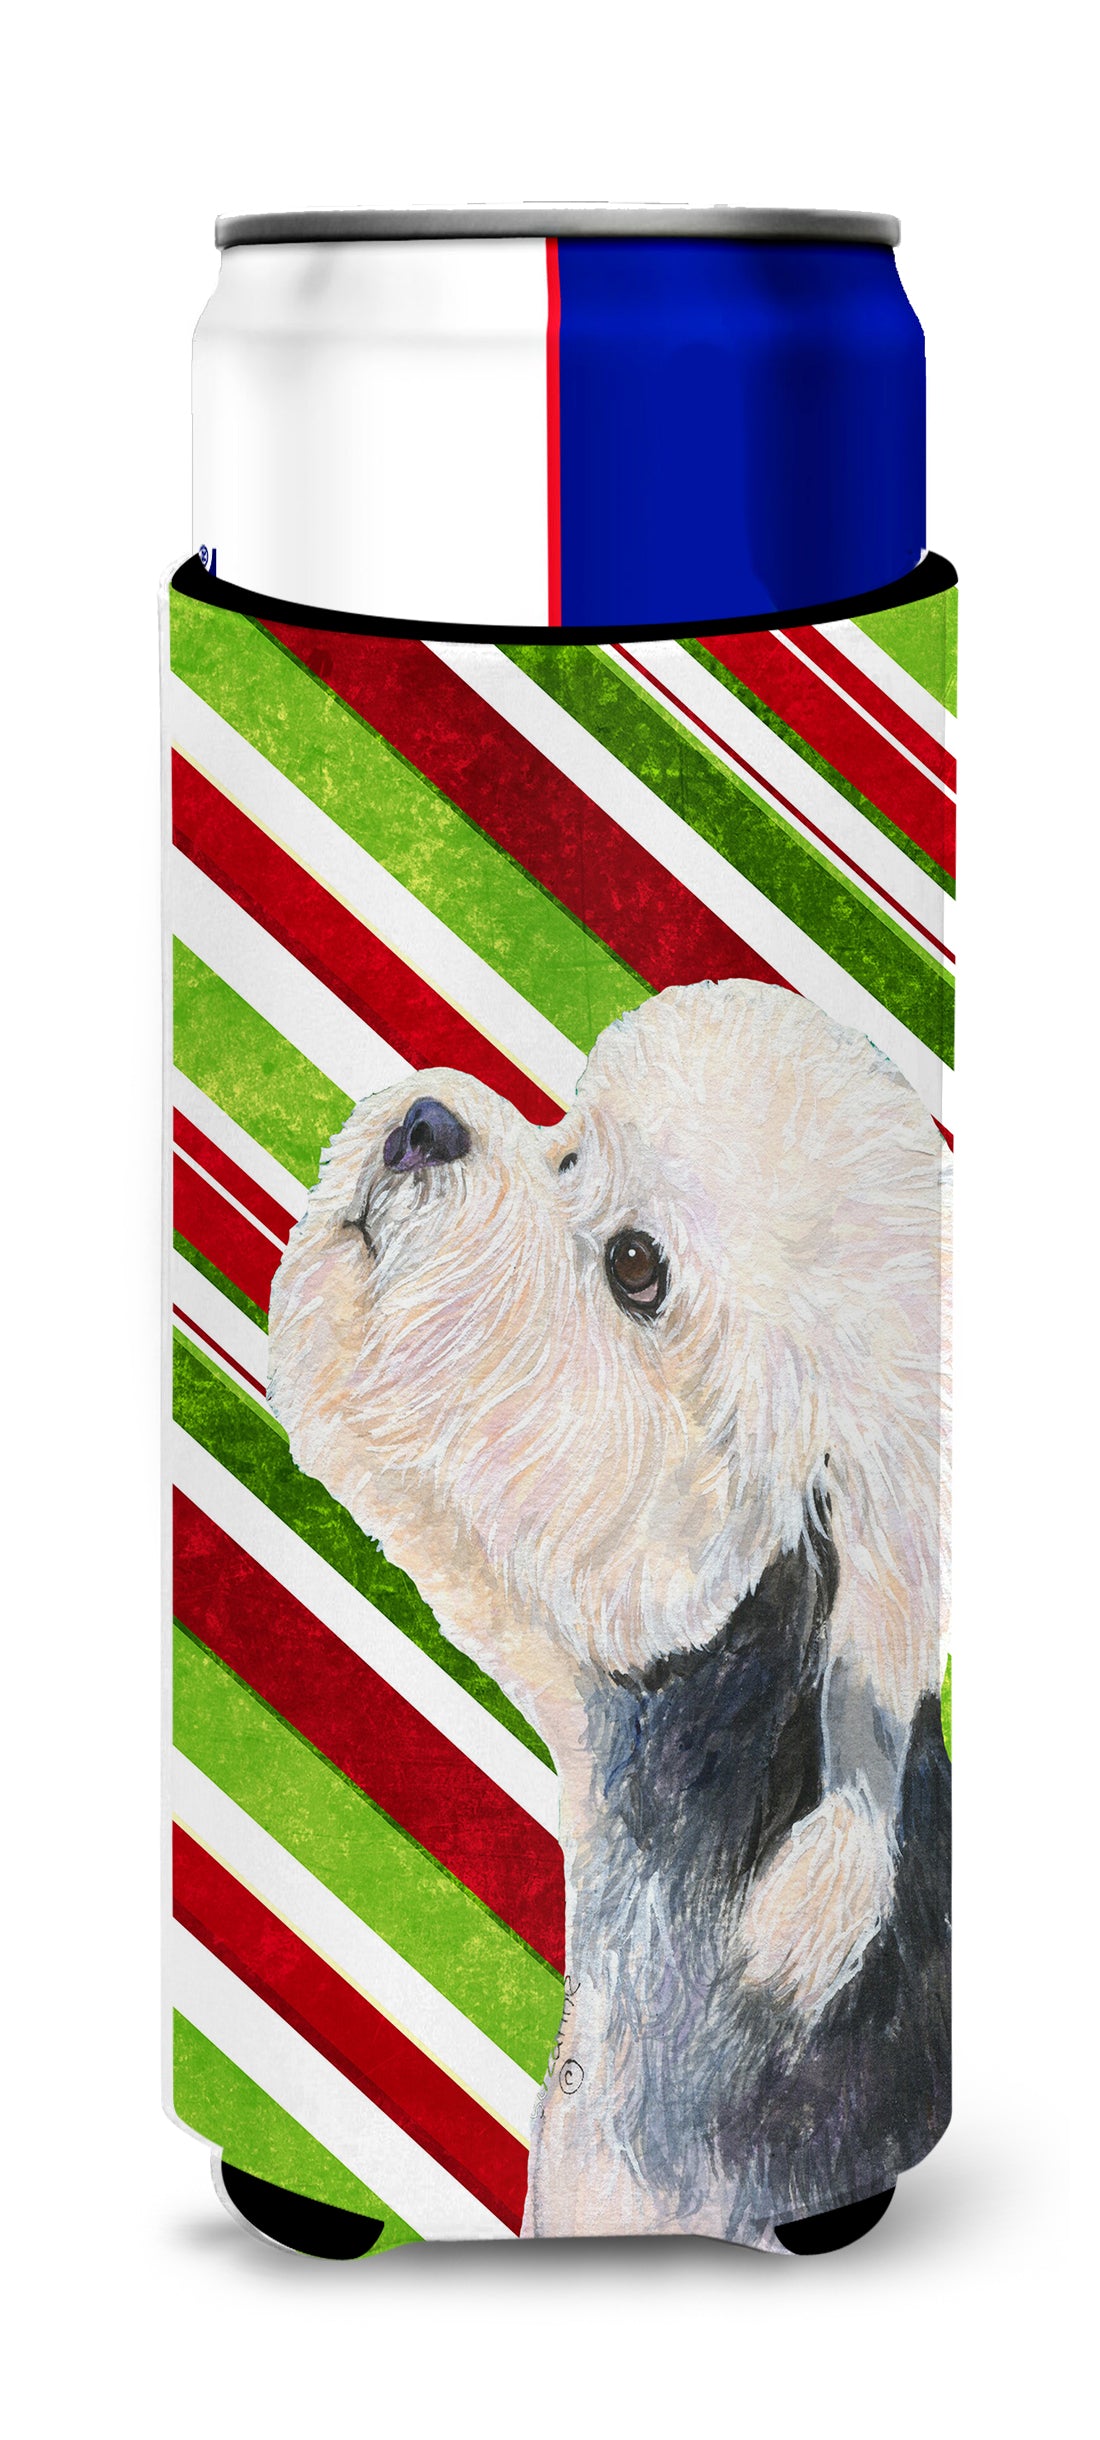 Dandie Dinmont Terrier Candy Cane Holiday Christmas Ultra Beverage Insulators for slim cans SS4572MUK